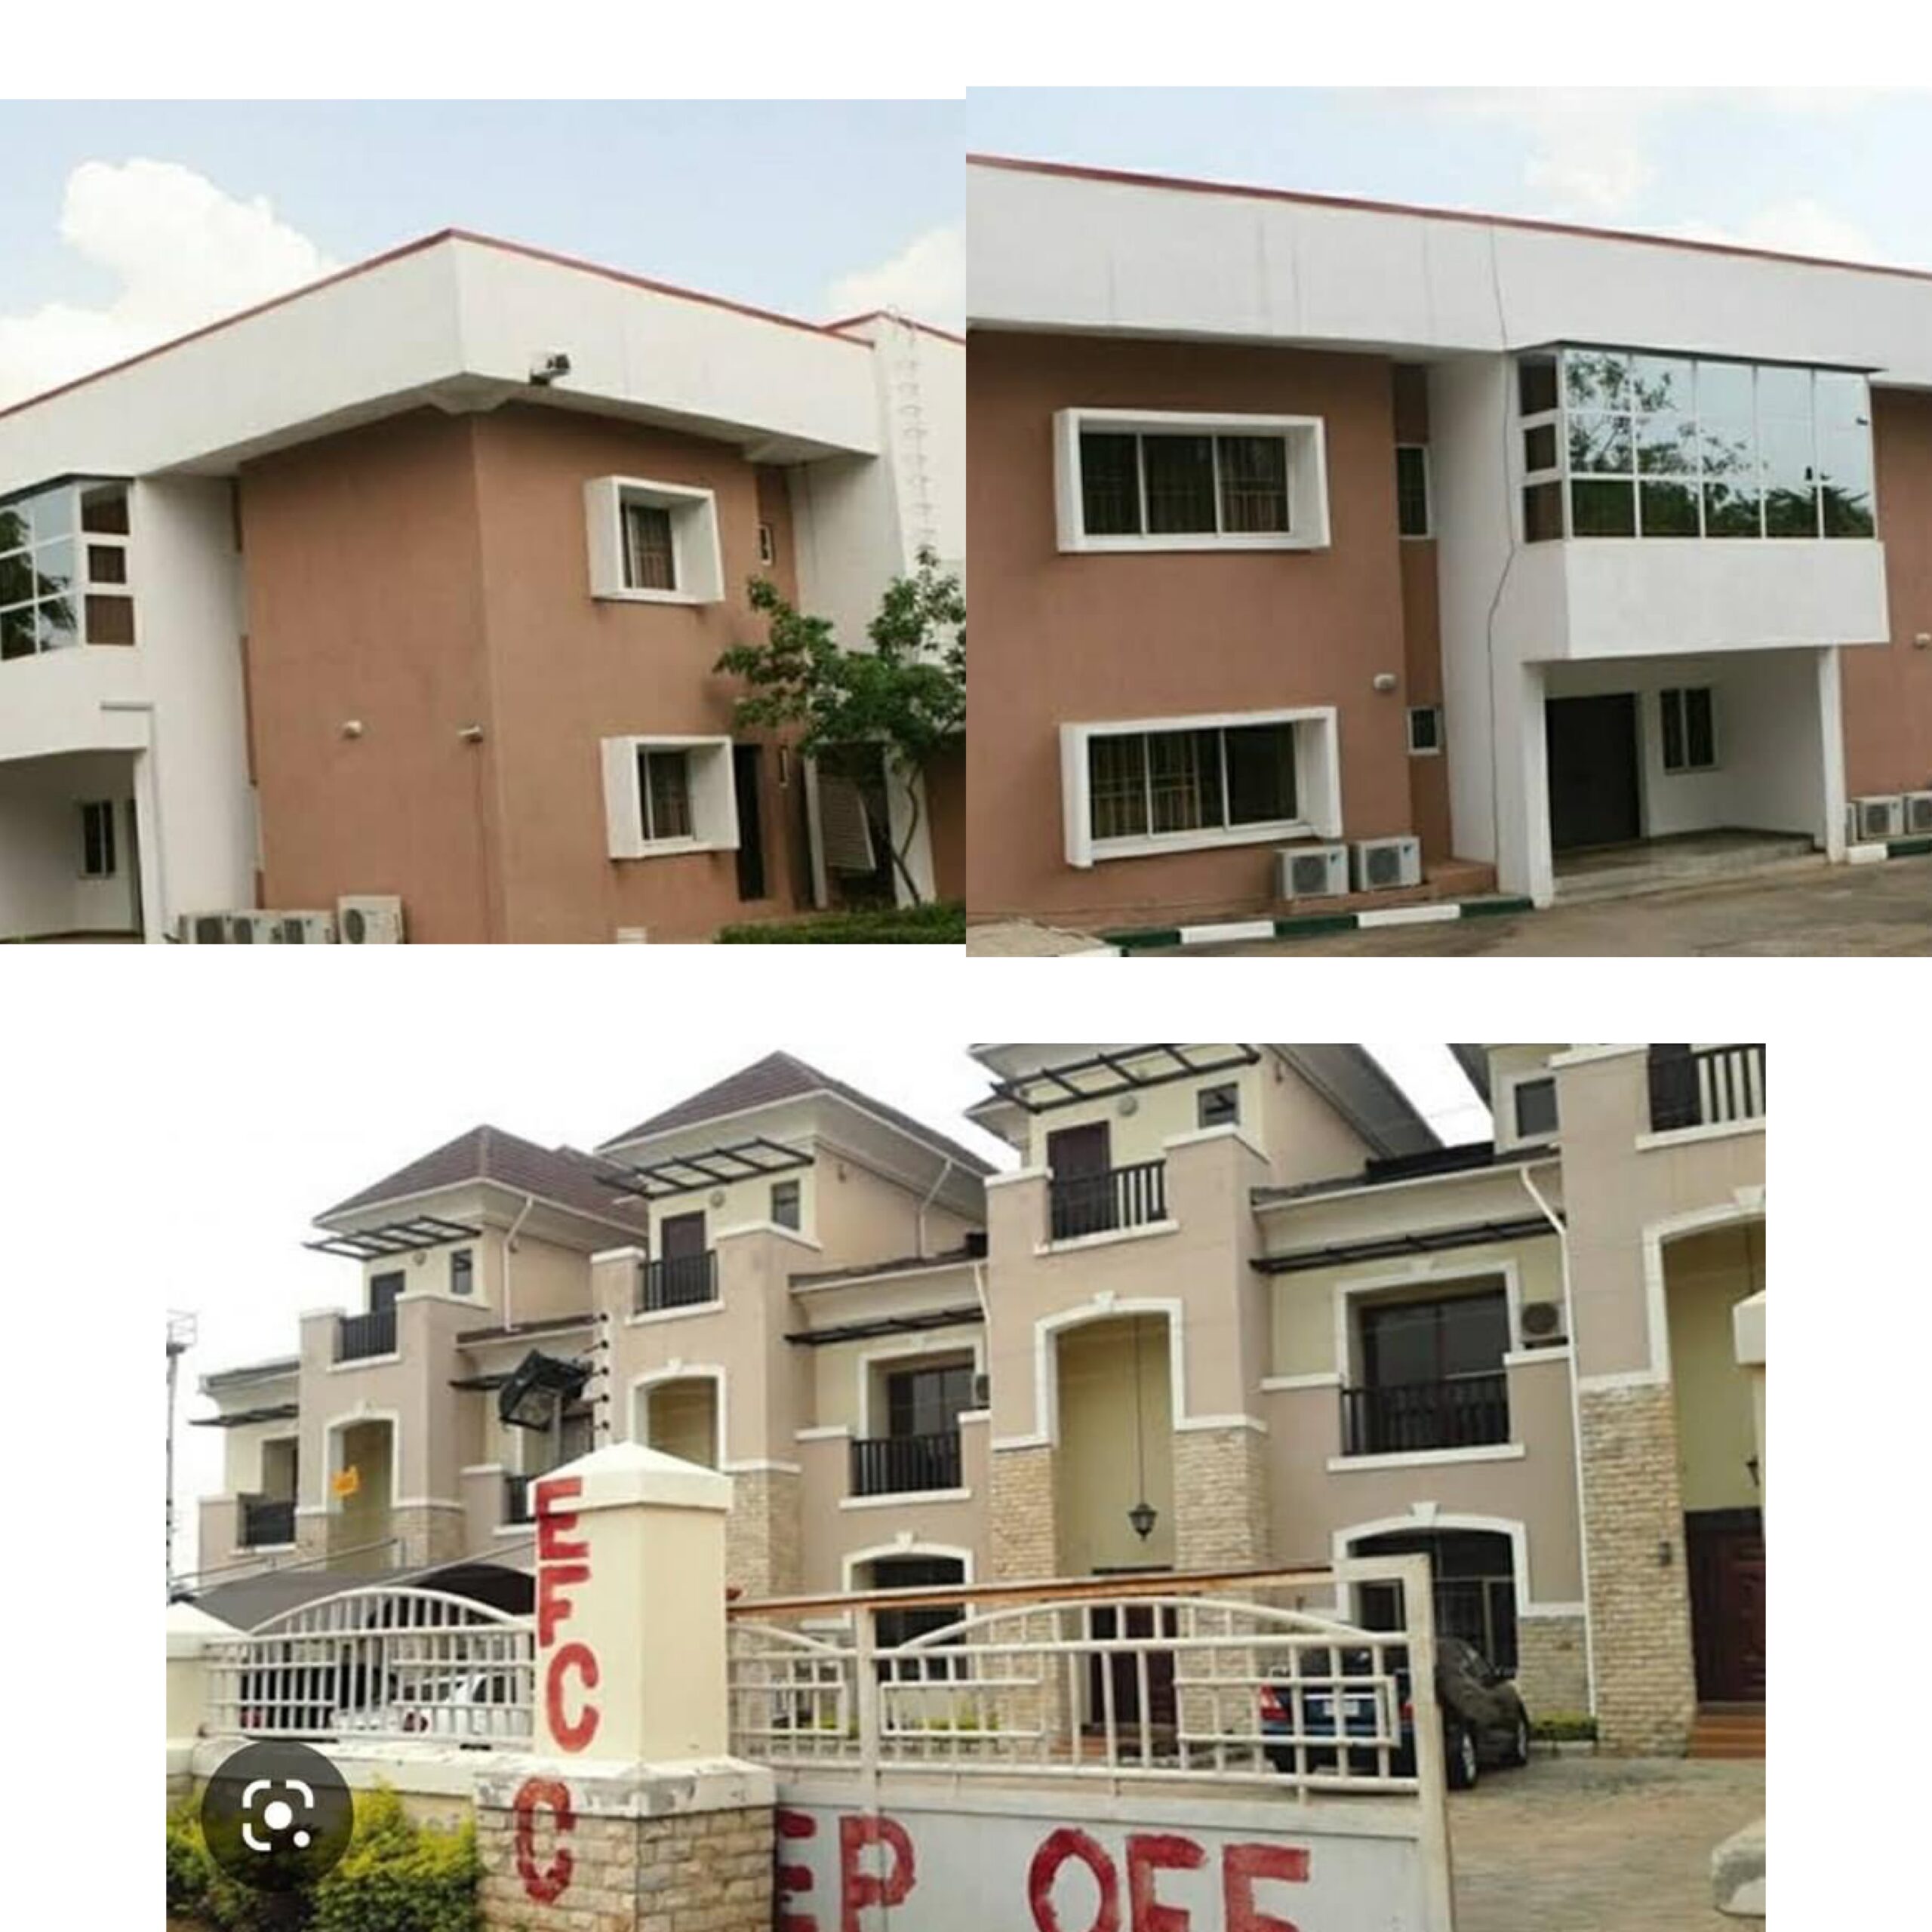 Auction: EFCC invites bids for forfeited properties nationwide